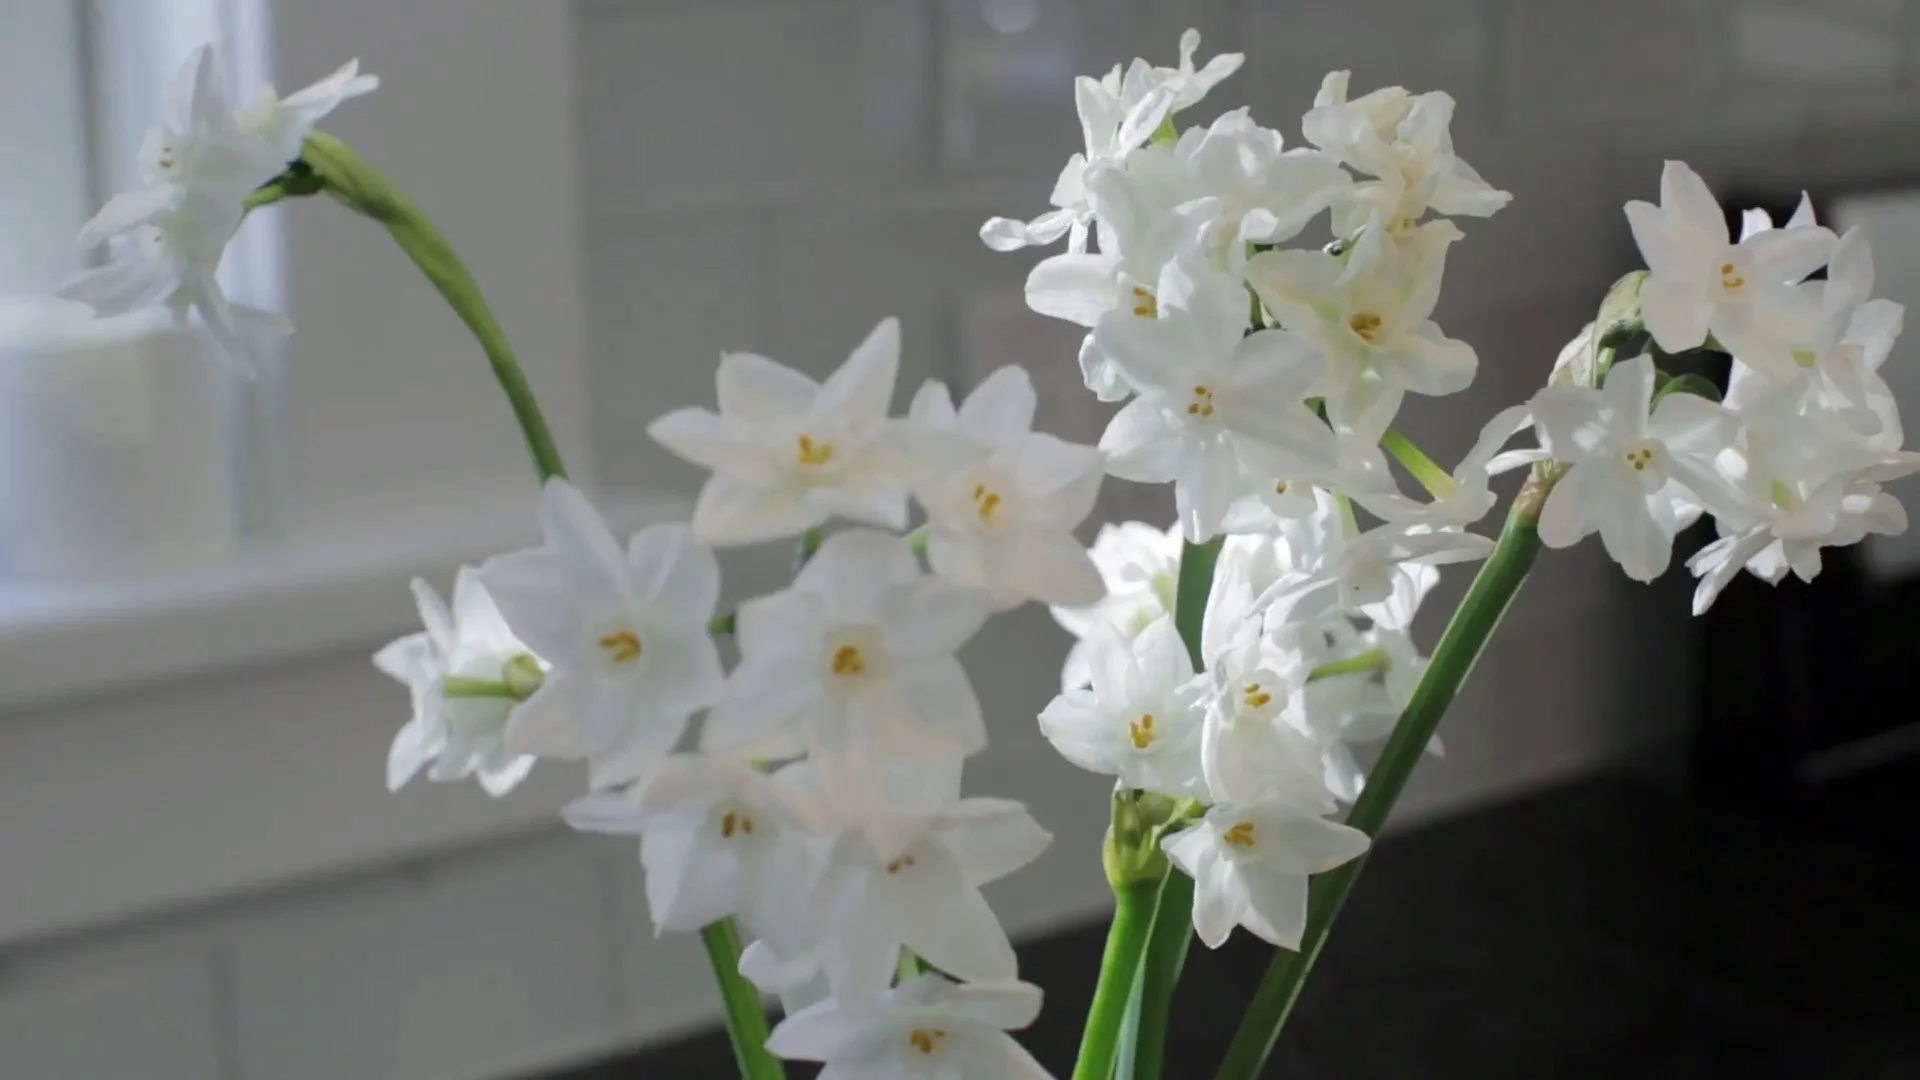 chinese narcissus bulbs